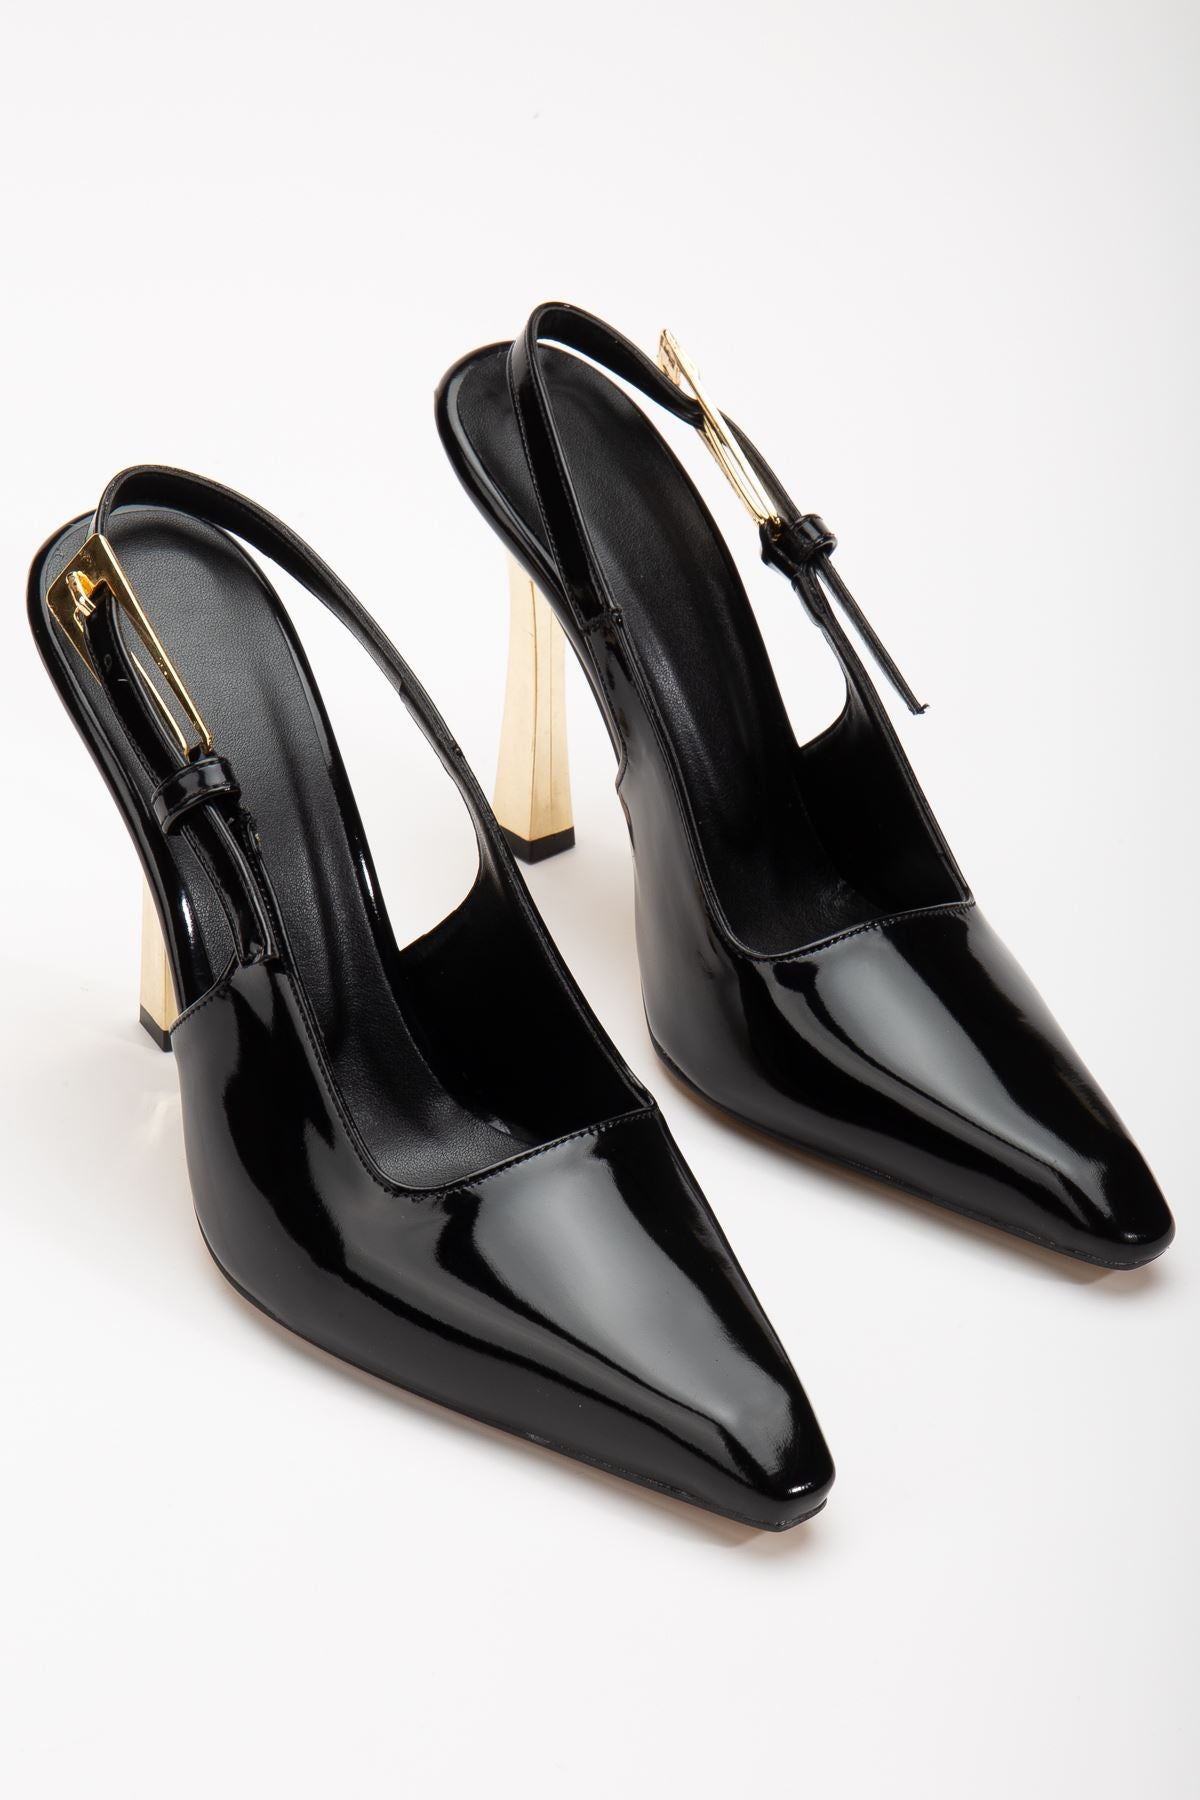 Minni Black Patent Leather Gold Detailed Blunt Toe Women's Heeled Shoes - STREETMODE™